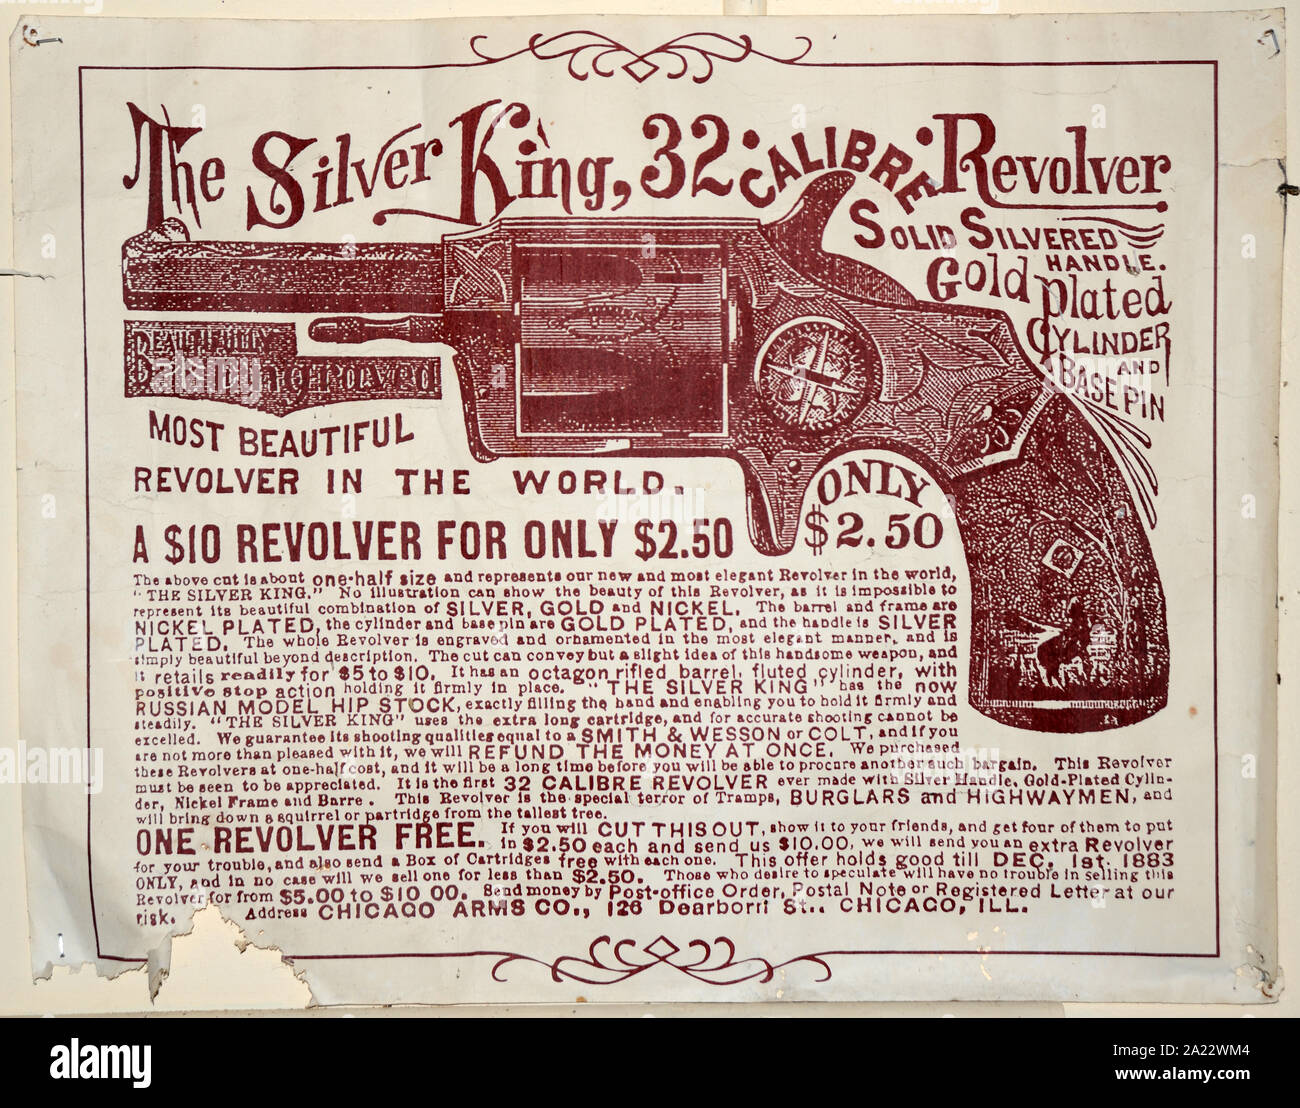 Vintage advertisement for a silver king .32 calibre revolver with a solid silvered handle and gold plated cylinder. Stock Photo